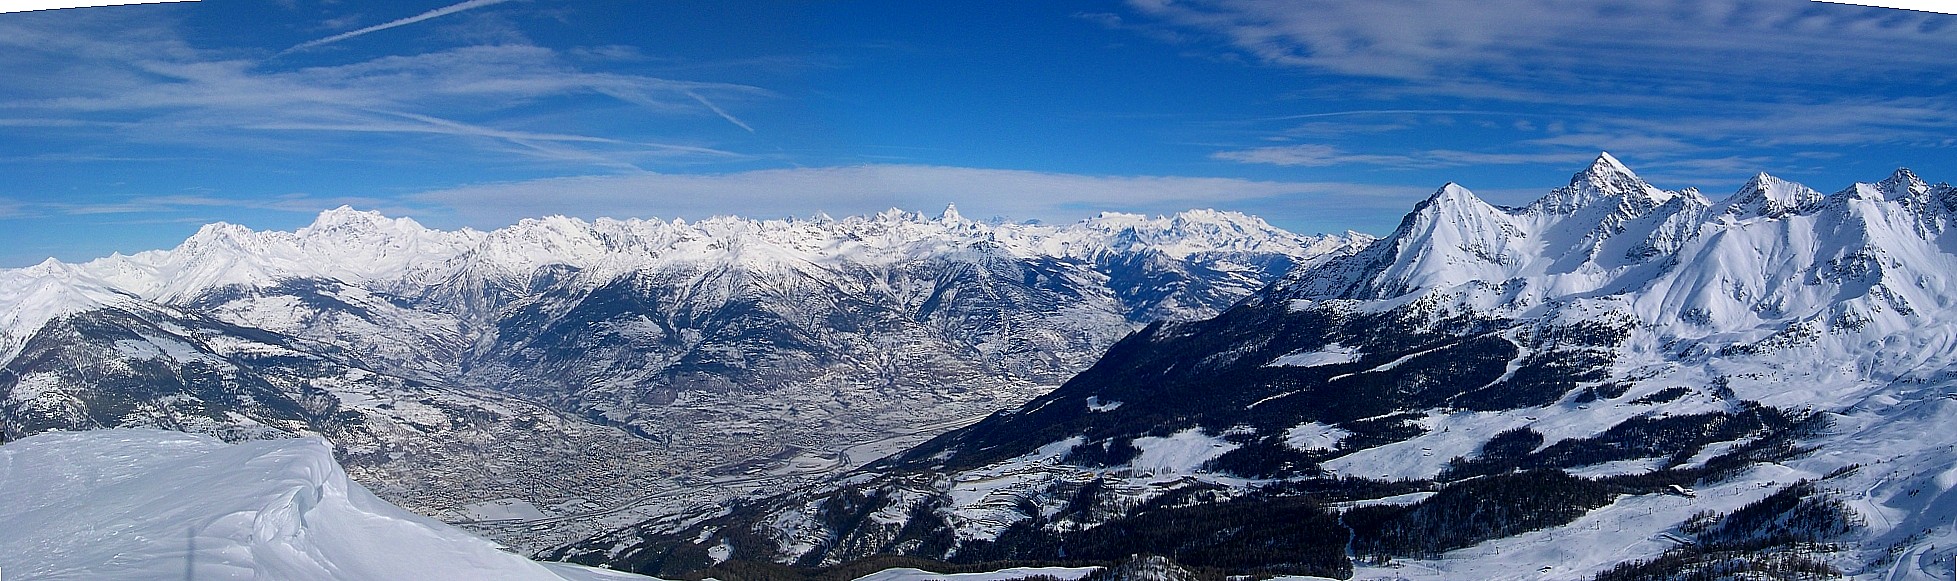 Panoramic view of Pila area and Aosta Valley